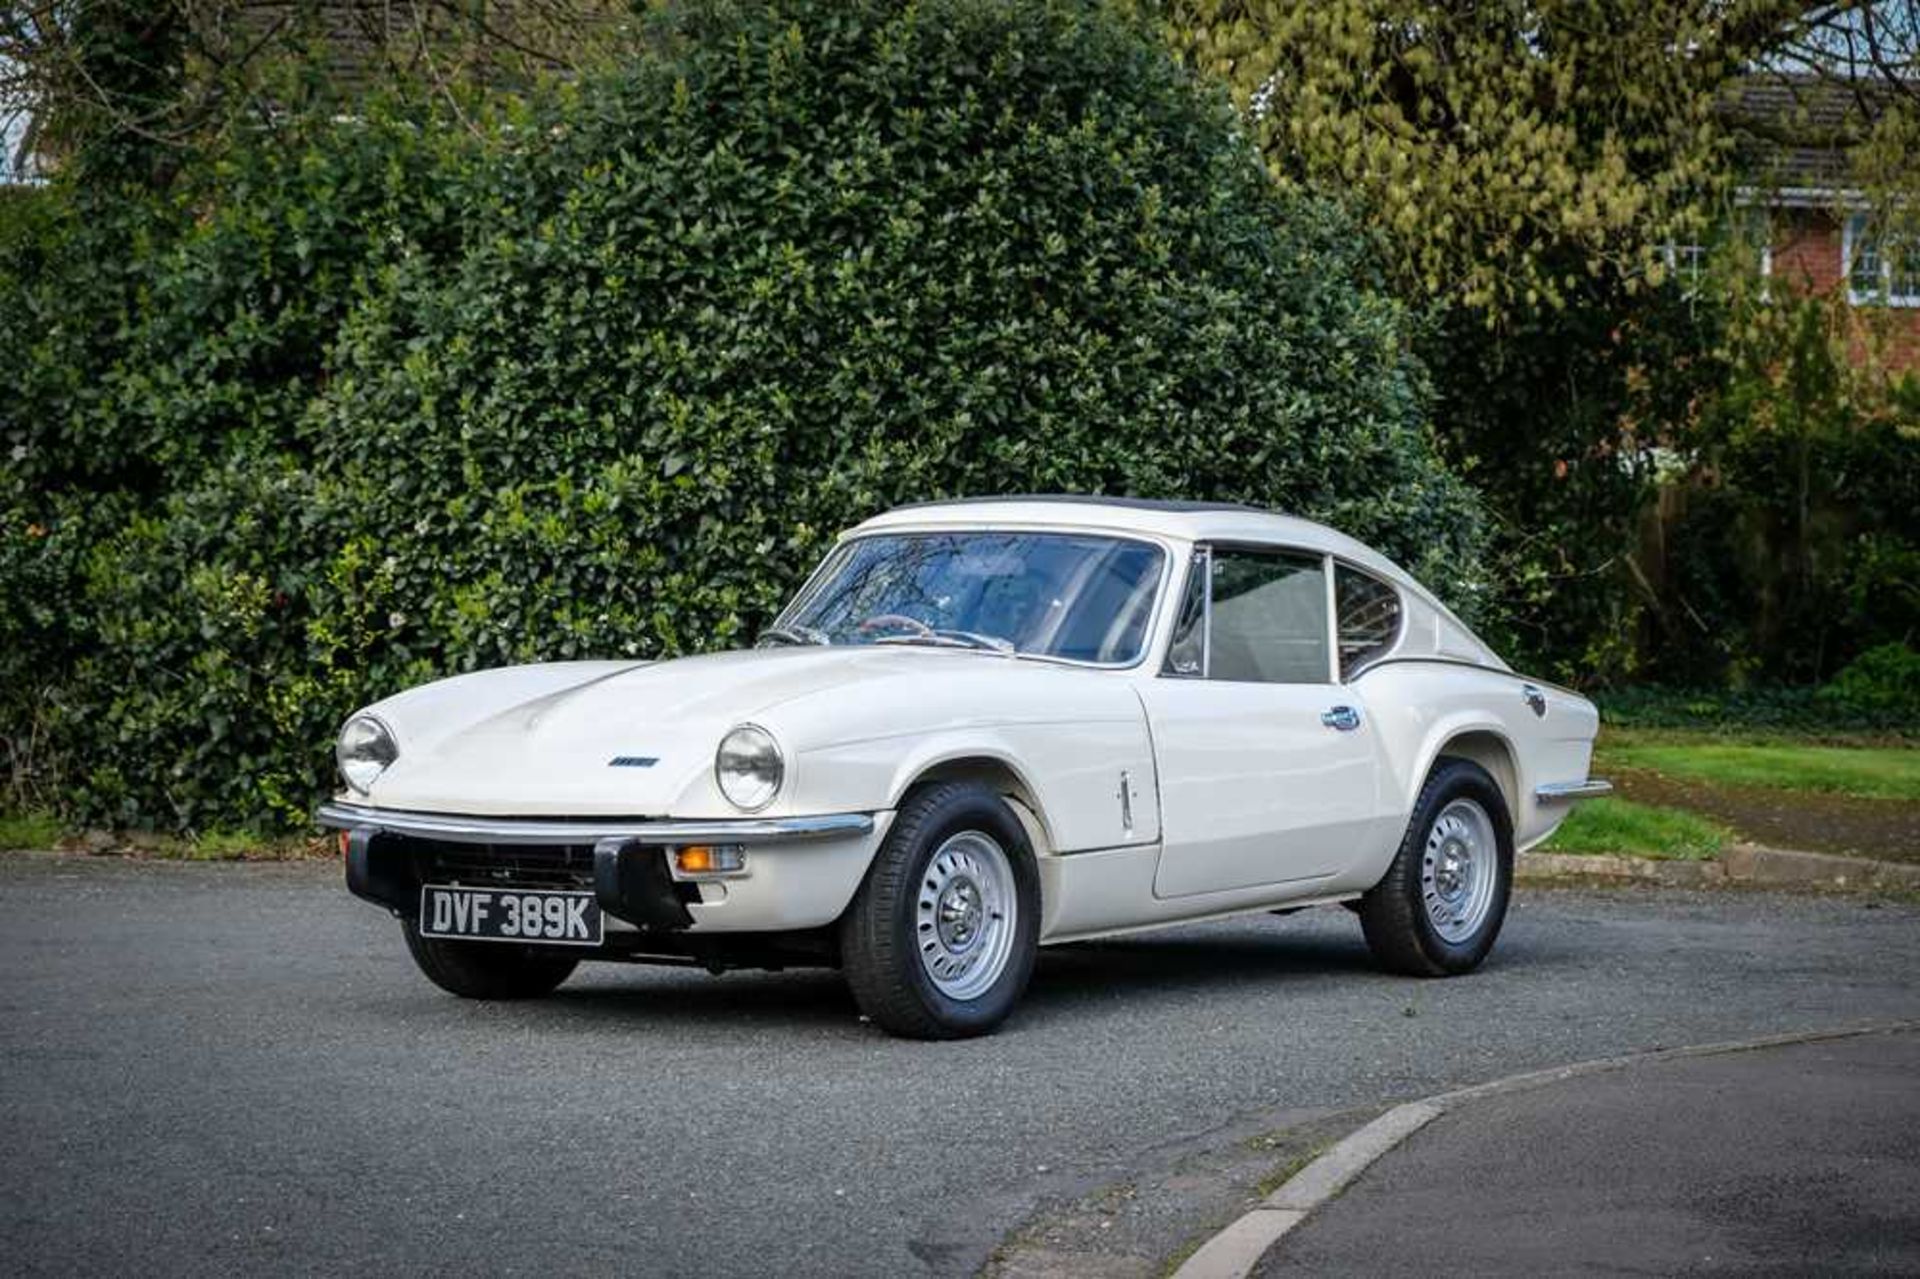 1971 Triumph GT6 MkIII Fresh from a full professional restoration - Image 16 of 106